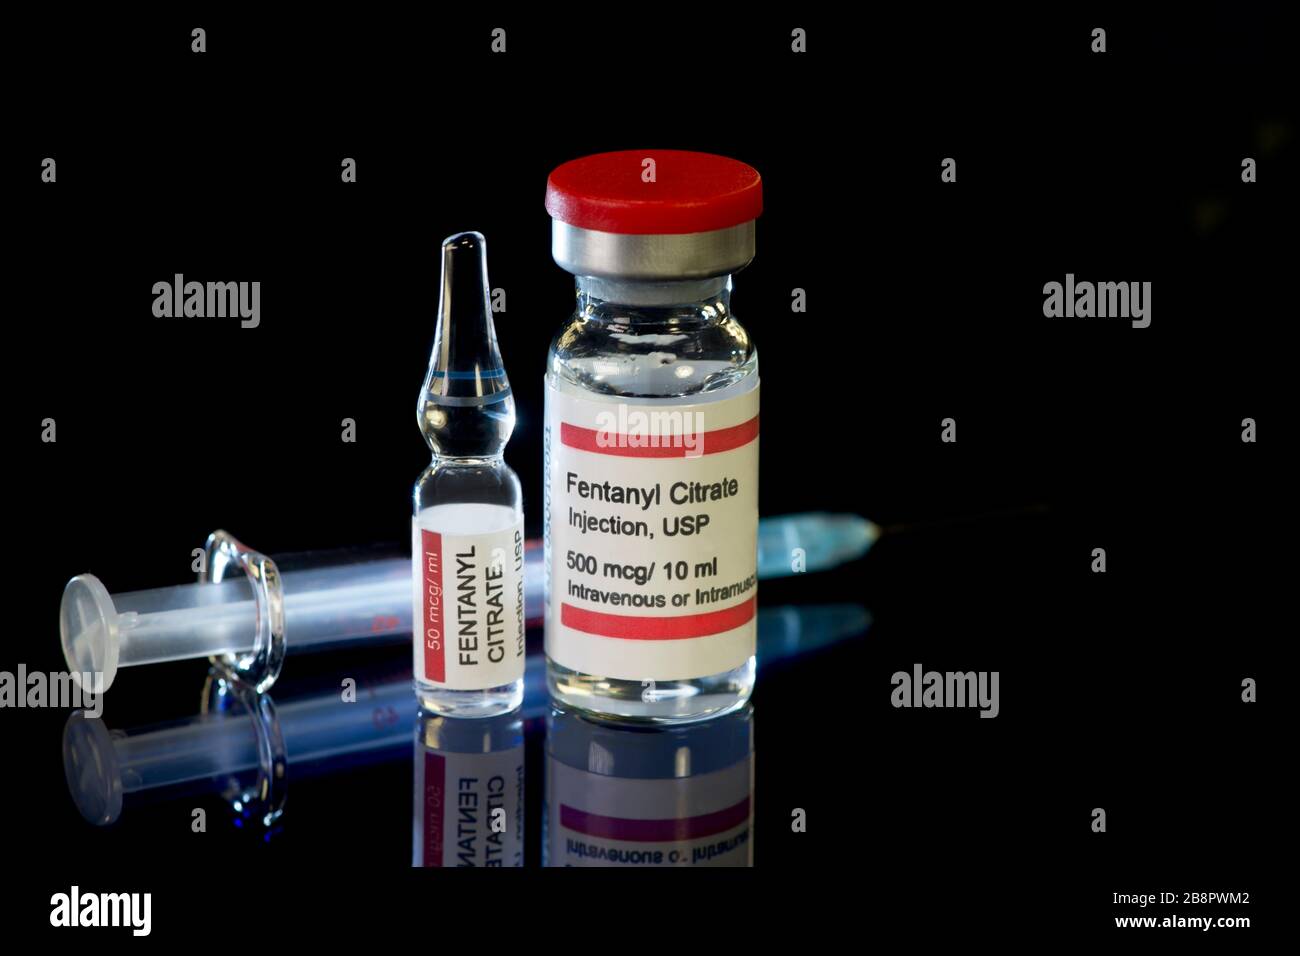 Fentanyl citrate vial and ampule with syringe on dark reflective surface. Stock Photo